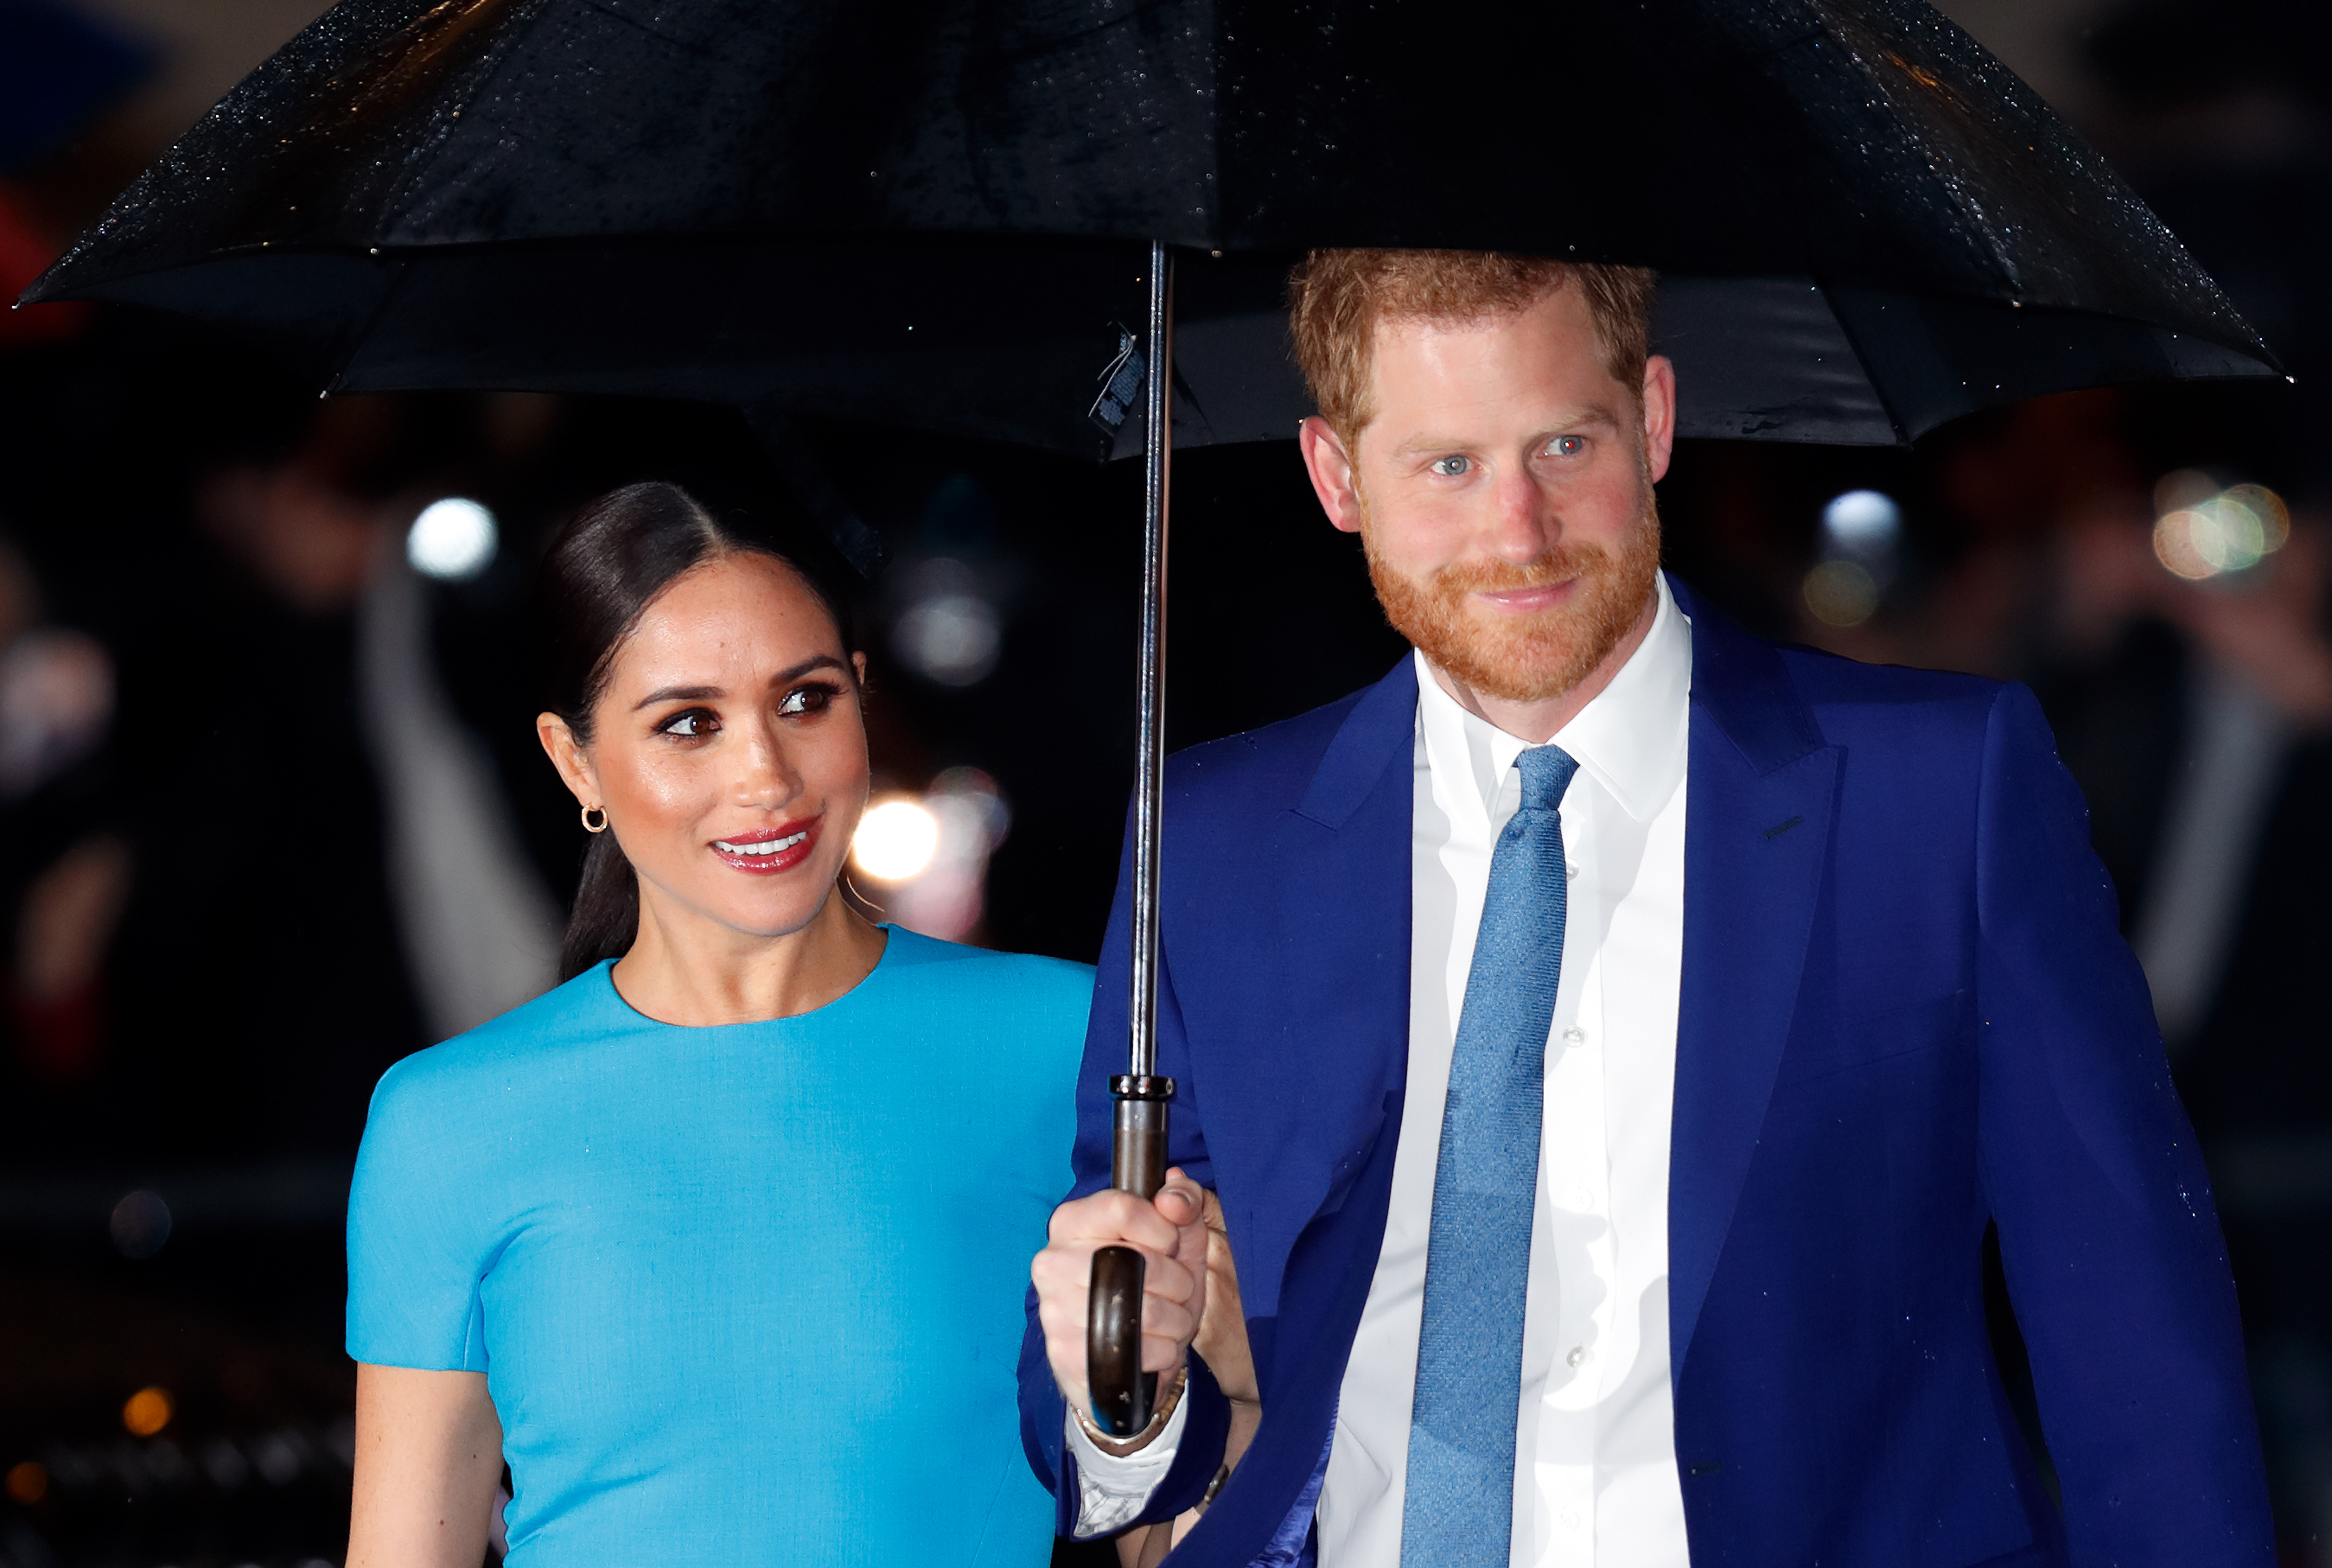 Meghan Markle and Prince Harry arrive at The Endeavour Fund Awards in March 2020